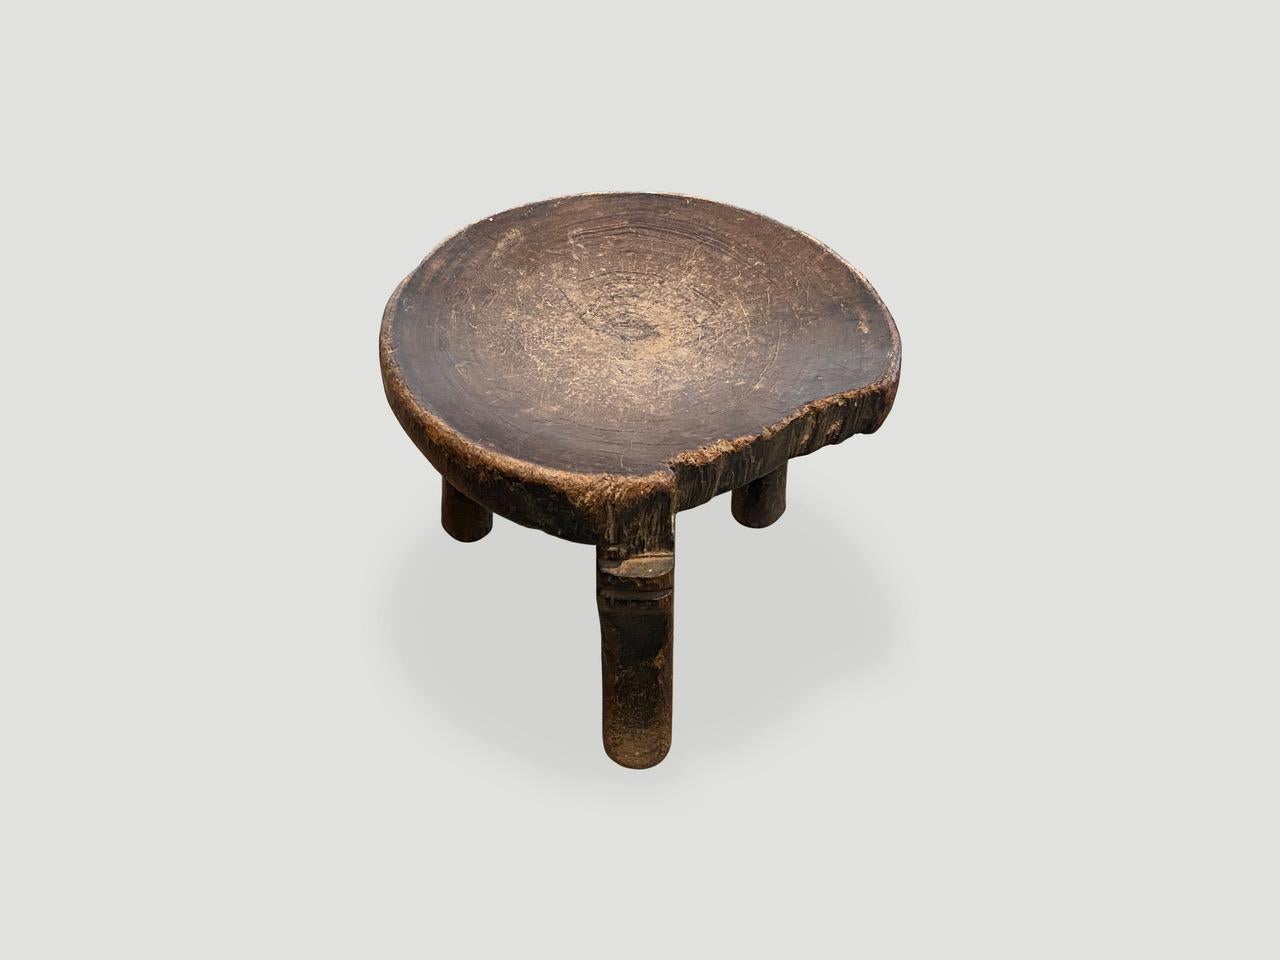 Primitive Andrianna Shamaris Antique African Side Table For Sale